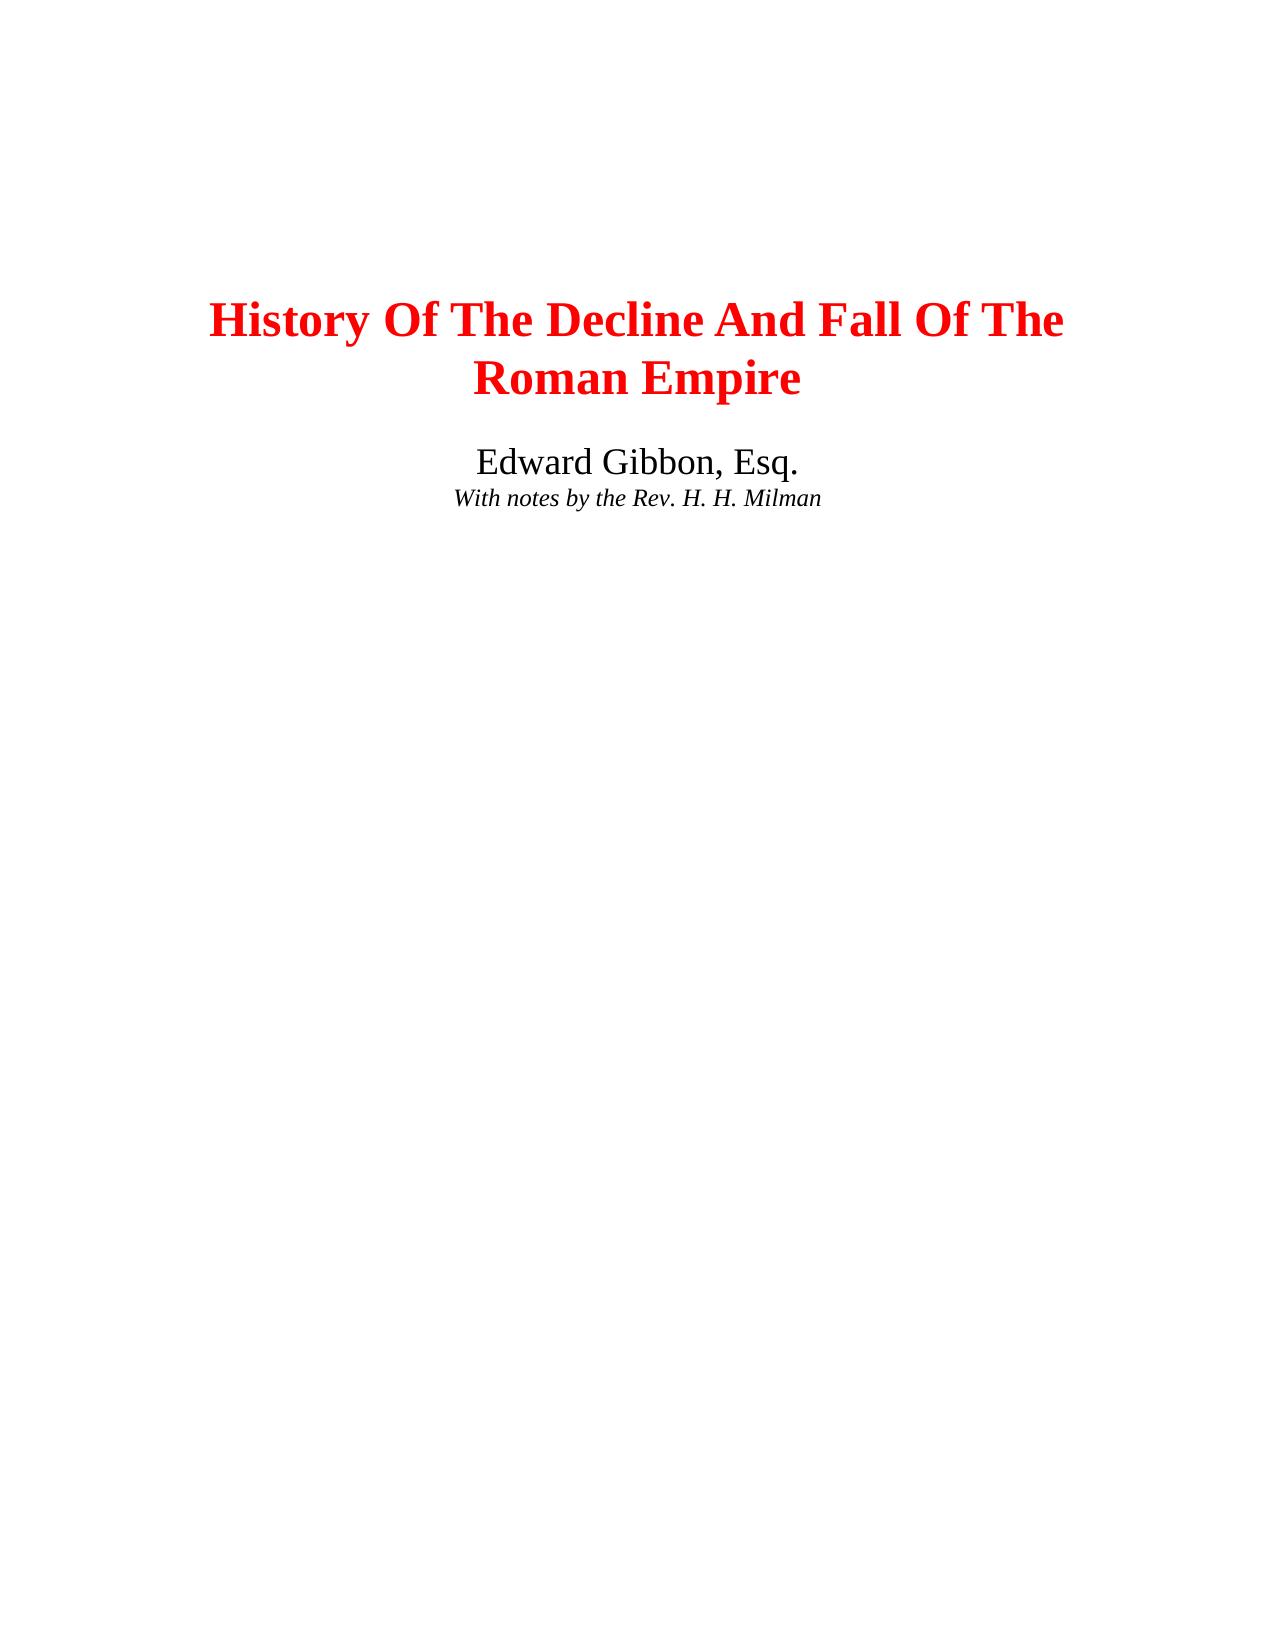 The History of The Decline and Fall of the Roman Empire